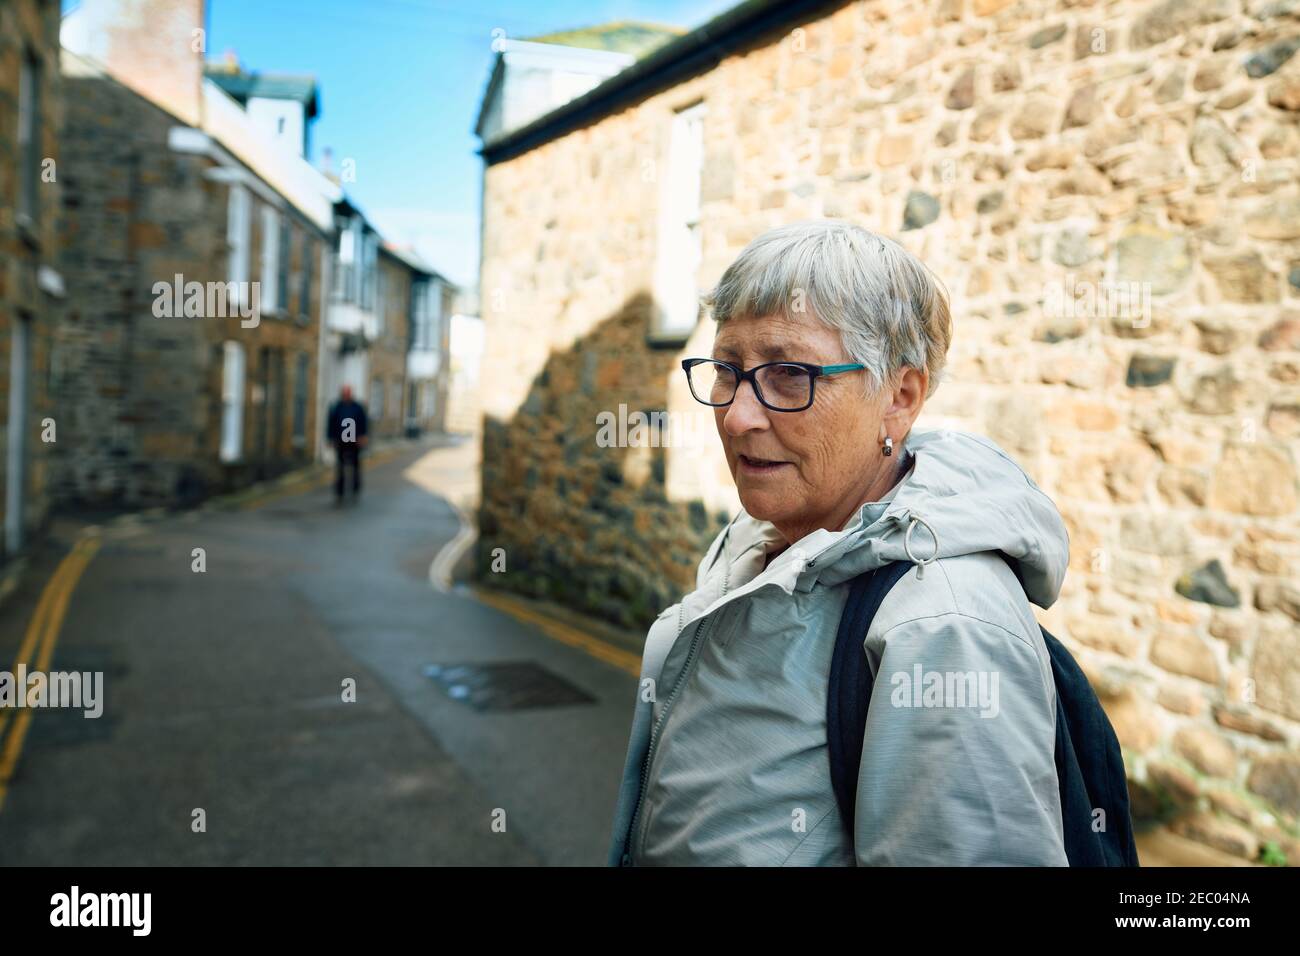 A senior woman is standing in the strreet in an english village with stone walls Stock Photo